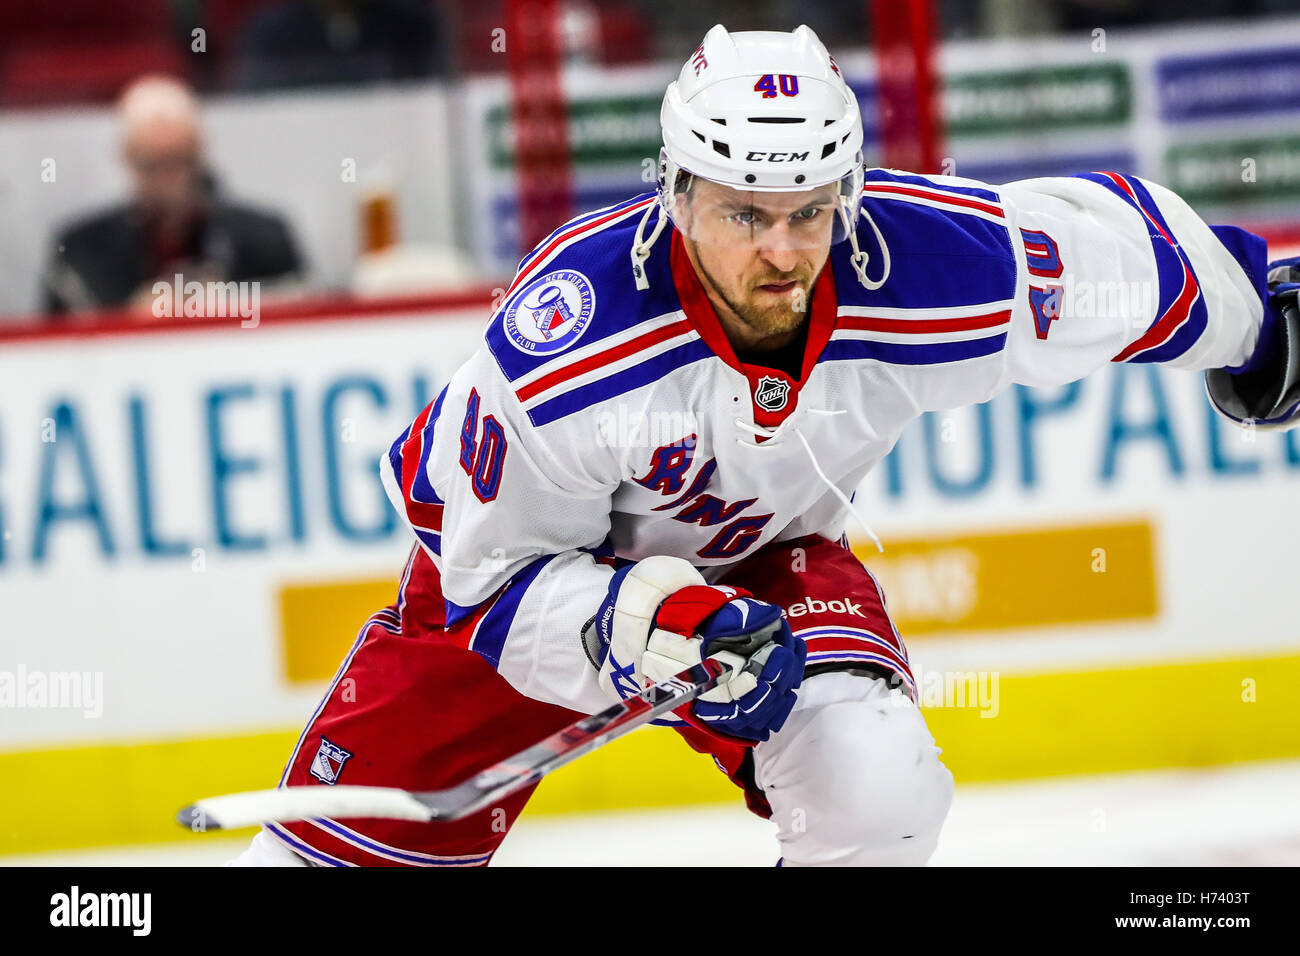 October 29, 2016 - Raleigh, North Carolina, U.S - New York Rangers right wing Michael Grabner (40) during the NHL game between the New York Rangers and the Carolina Hurricanes at the PNC Arena. (Credit Image: © Andy Martin Jr. via ZUMA Wire) Stock Photo